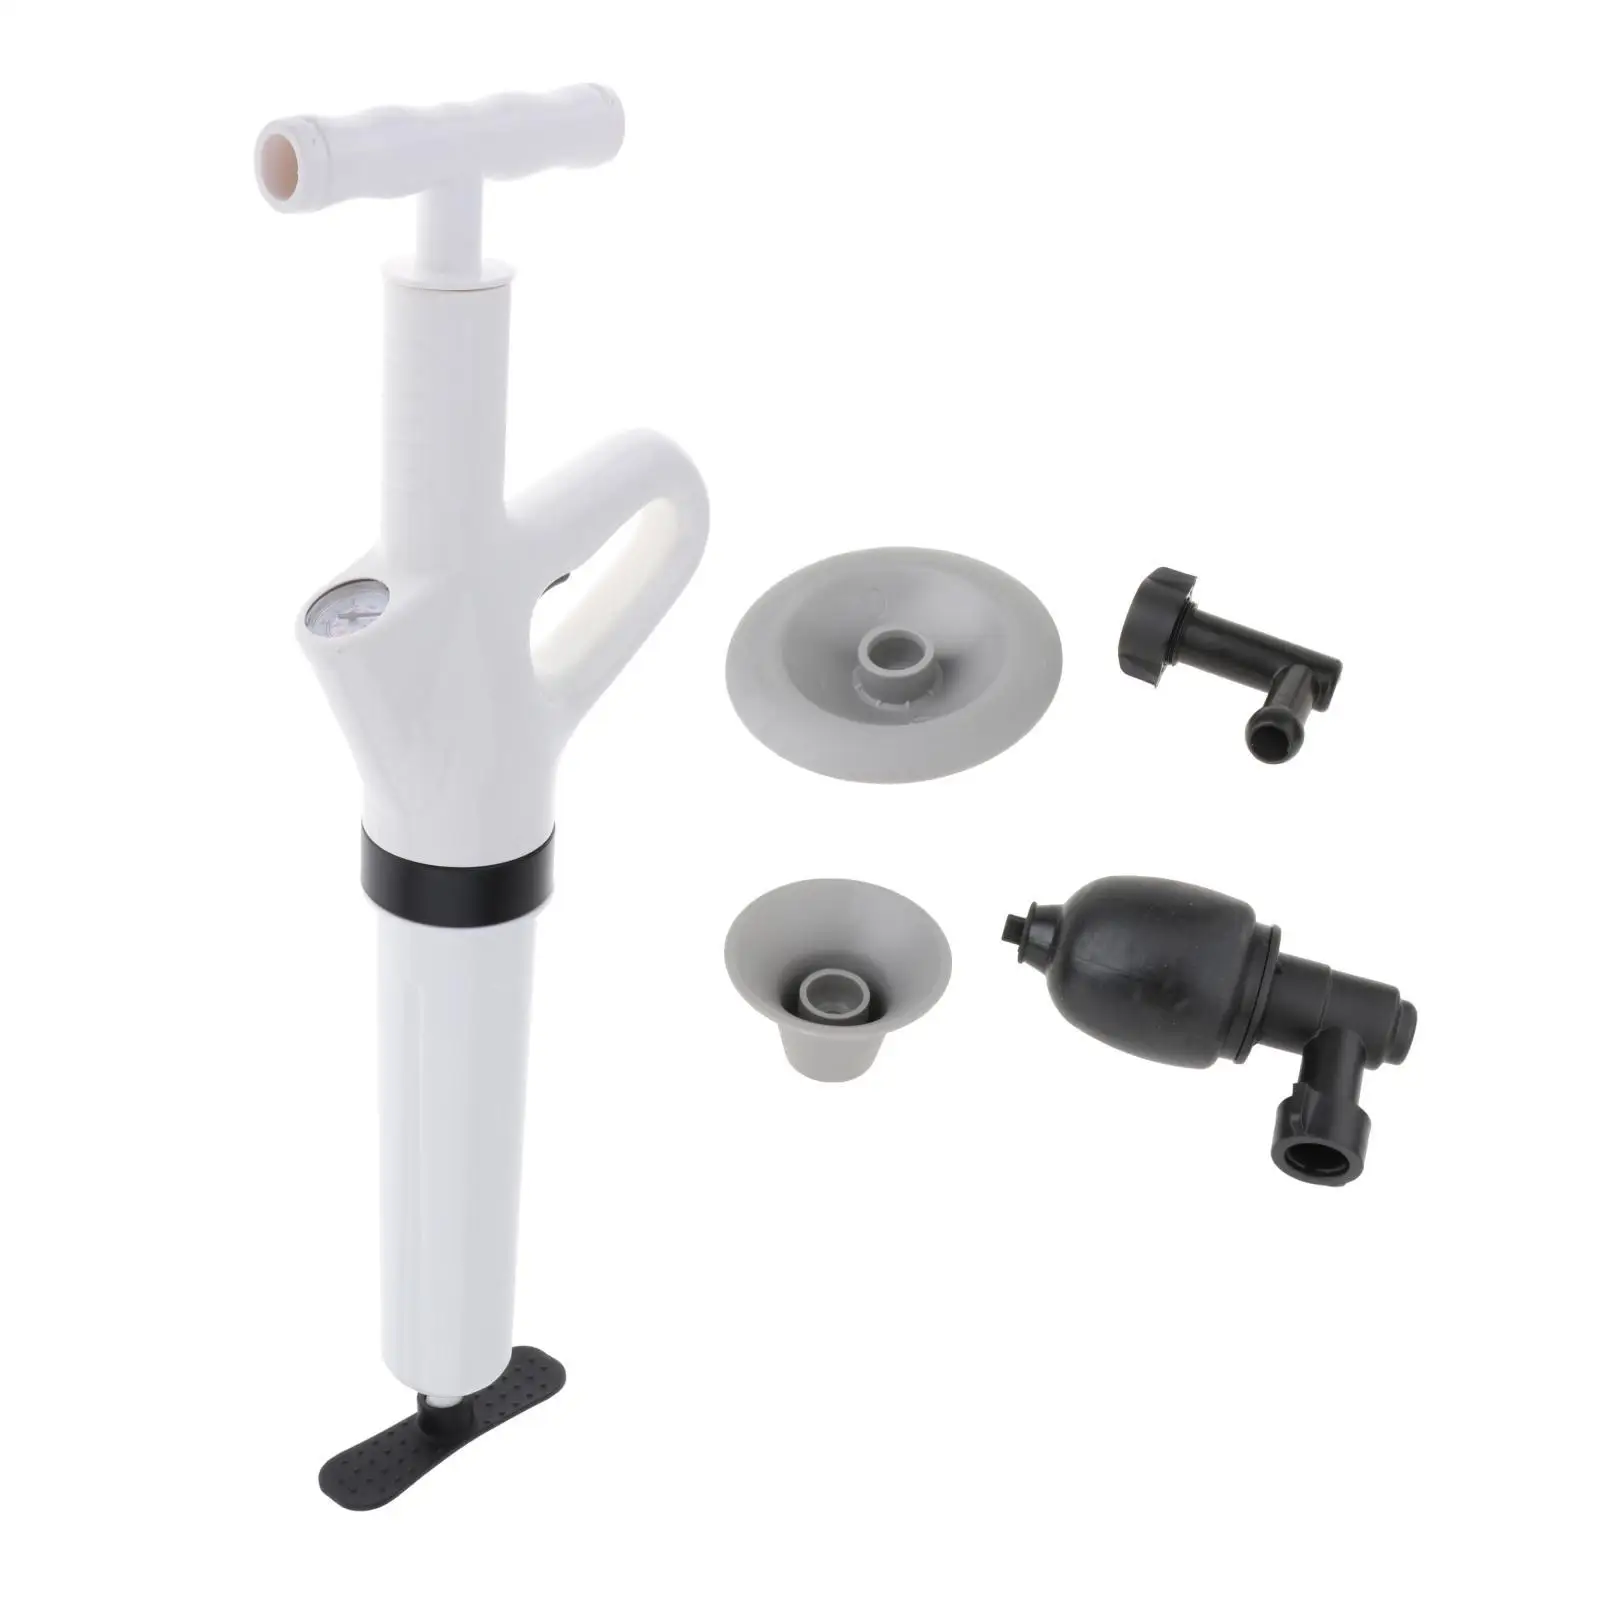 Air Pressure Plunger Sewer Toilet Kitchen Sink Plunger Hair Drain Clog Removal Tool for Bathroom Cleaning